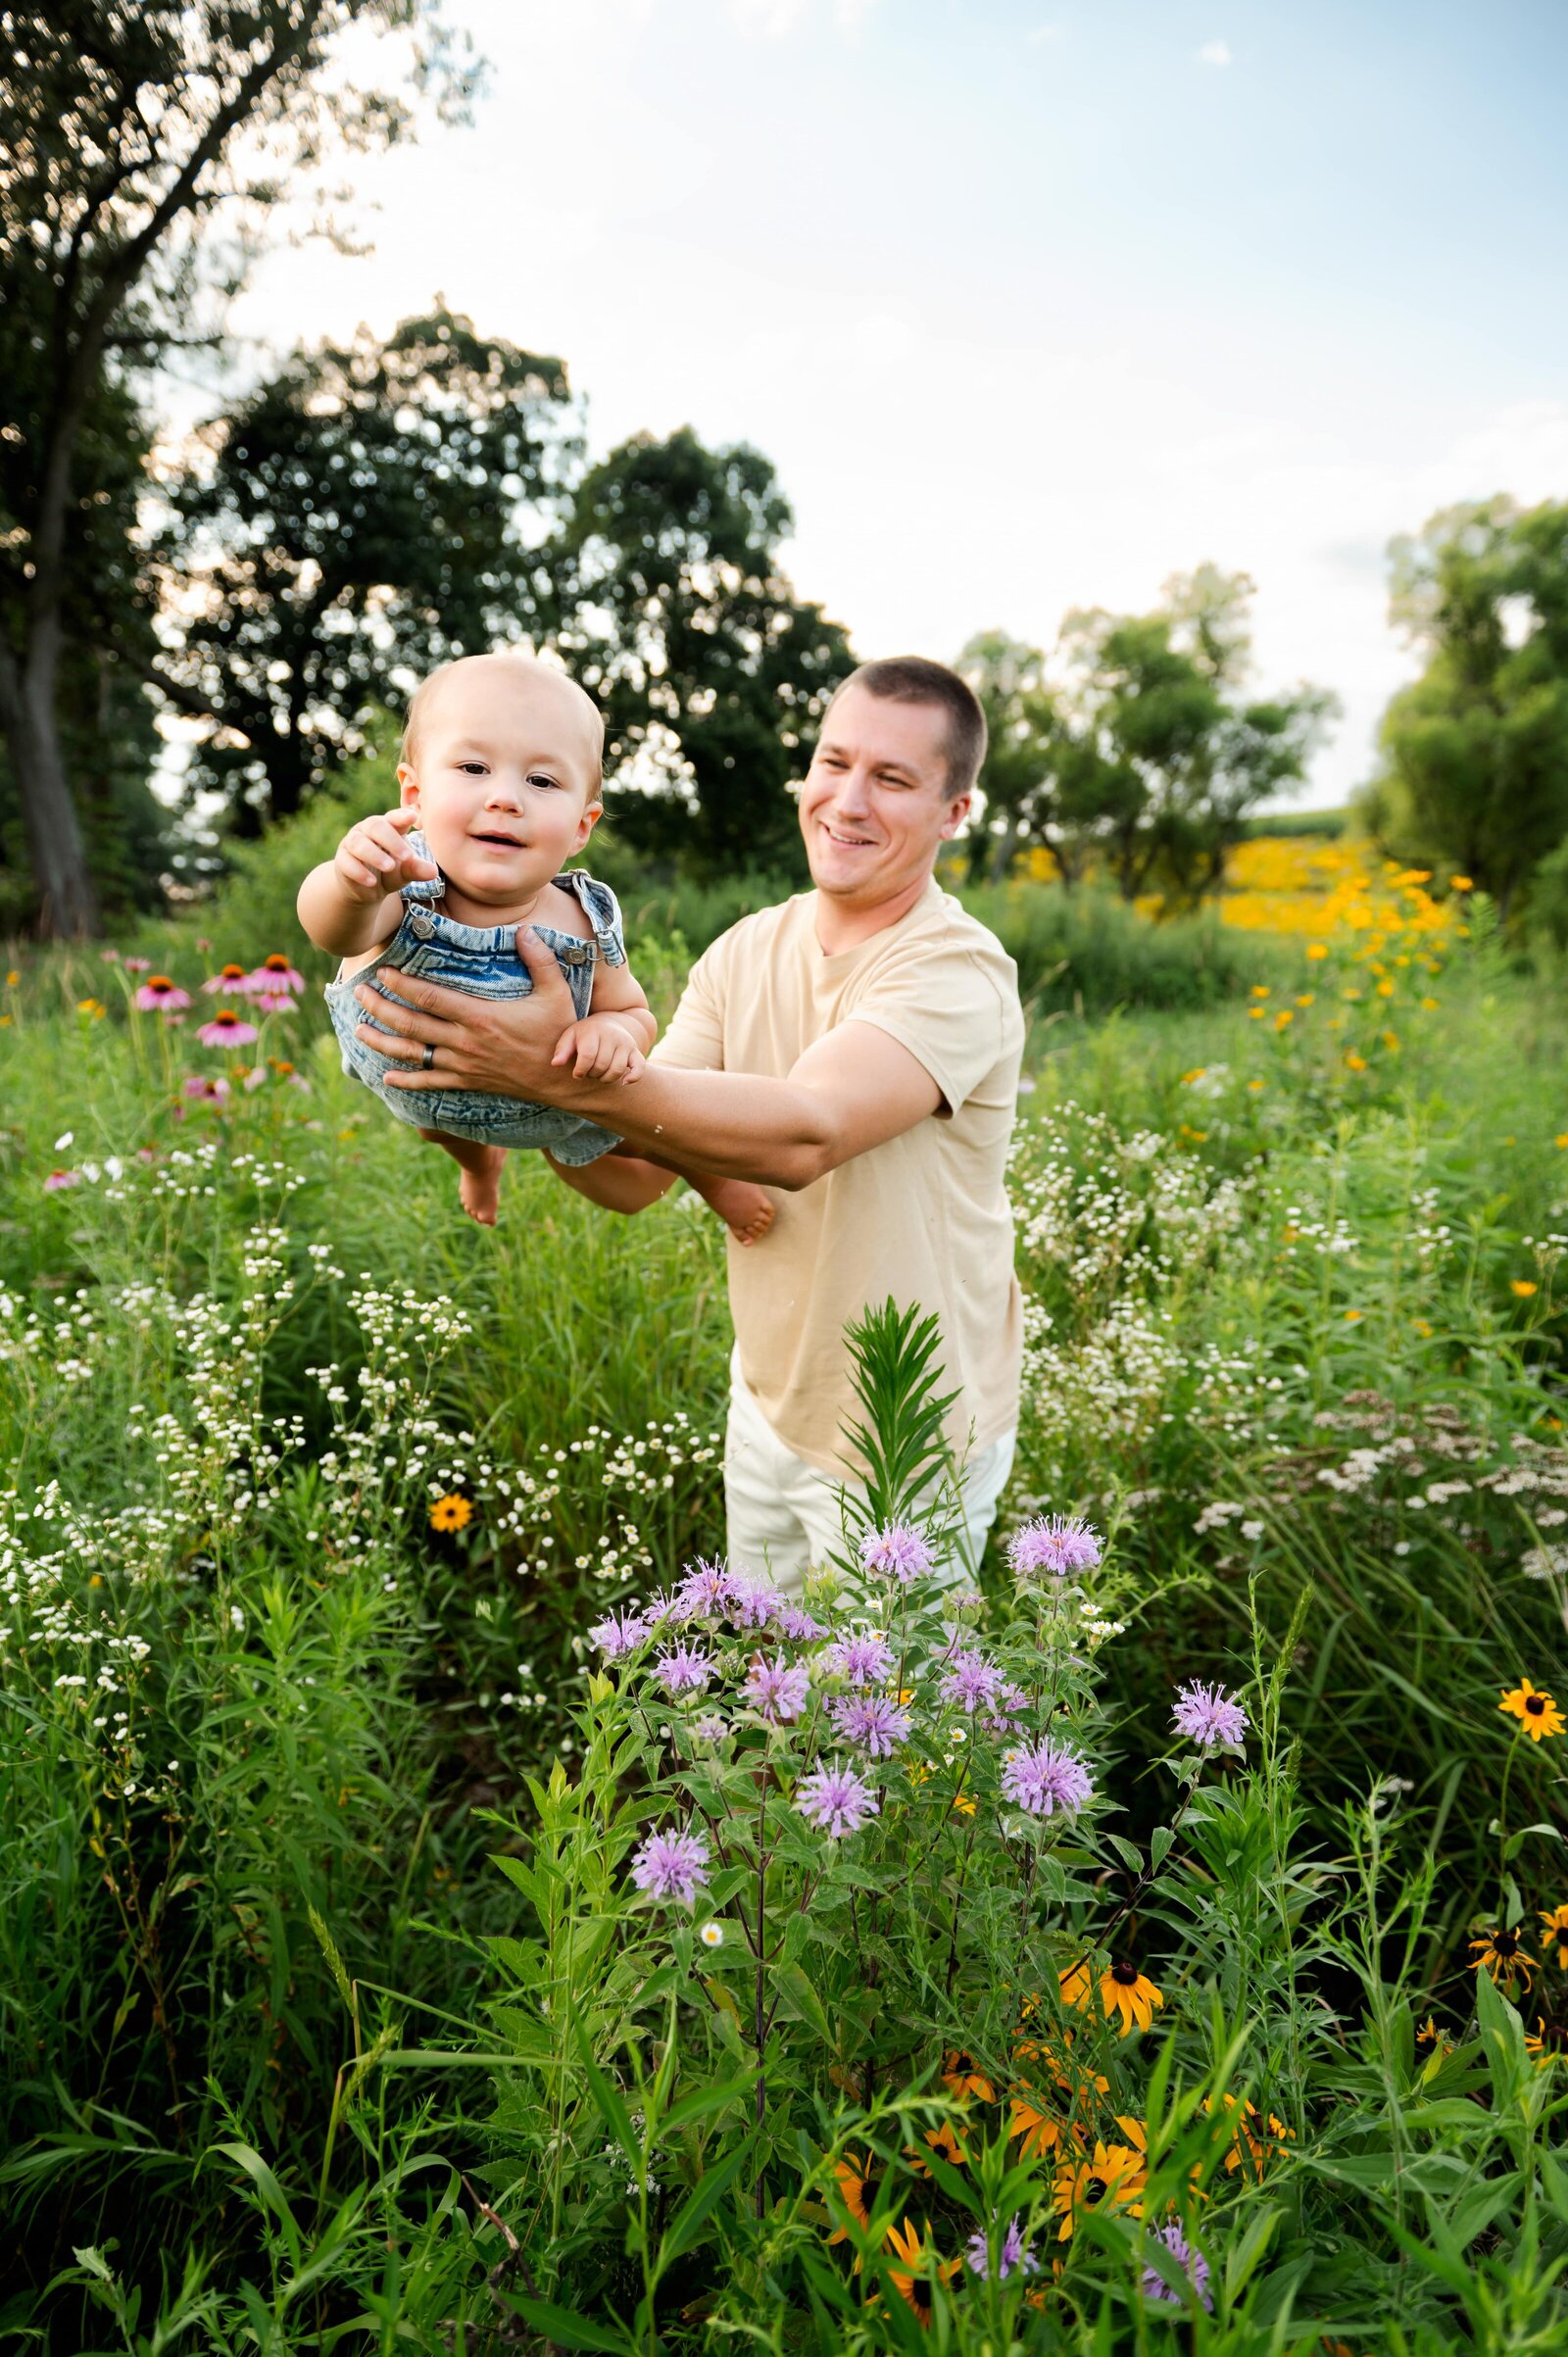 dad playing airplane with his son in a flower field in Maryland